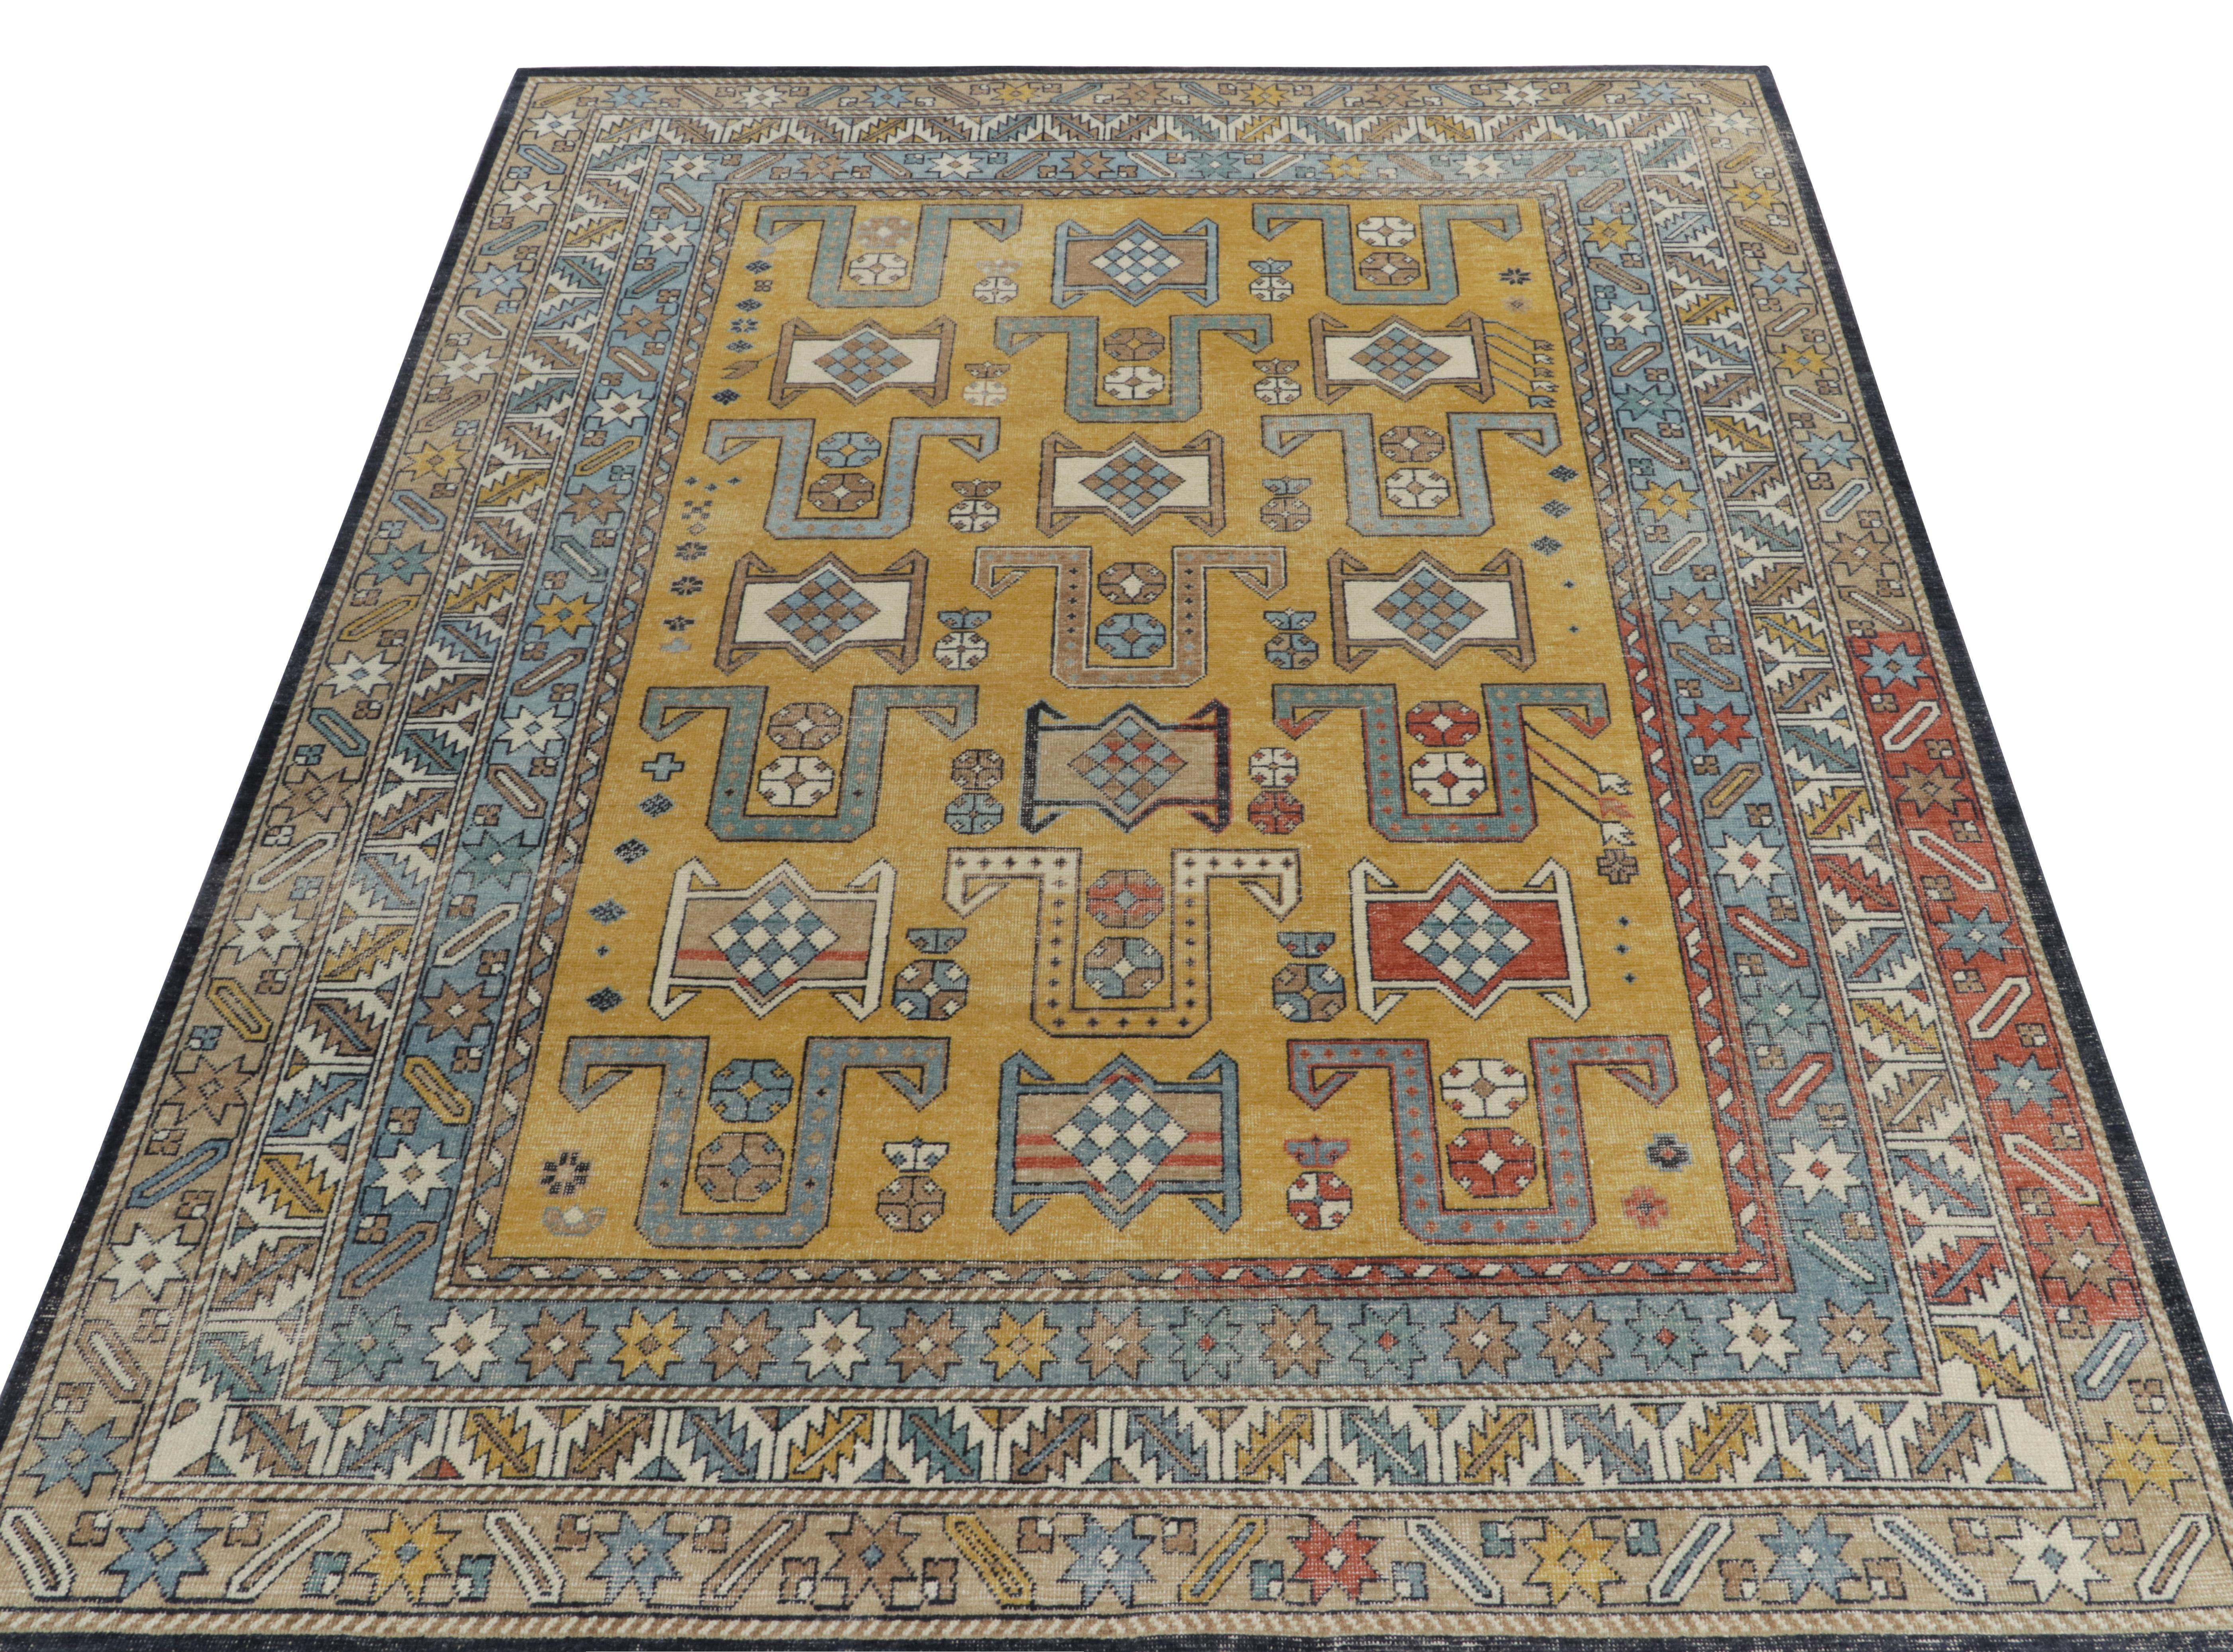 Hand-knotted in wool, a 9 x 12 distressed style rug from our Homage selections with a twist on classic tribal aesthetics with geometric patterns. The colorway enjoys gold, light blue & warm orange in geometric patterns exemplifying the element of